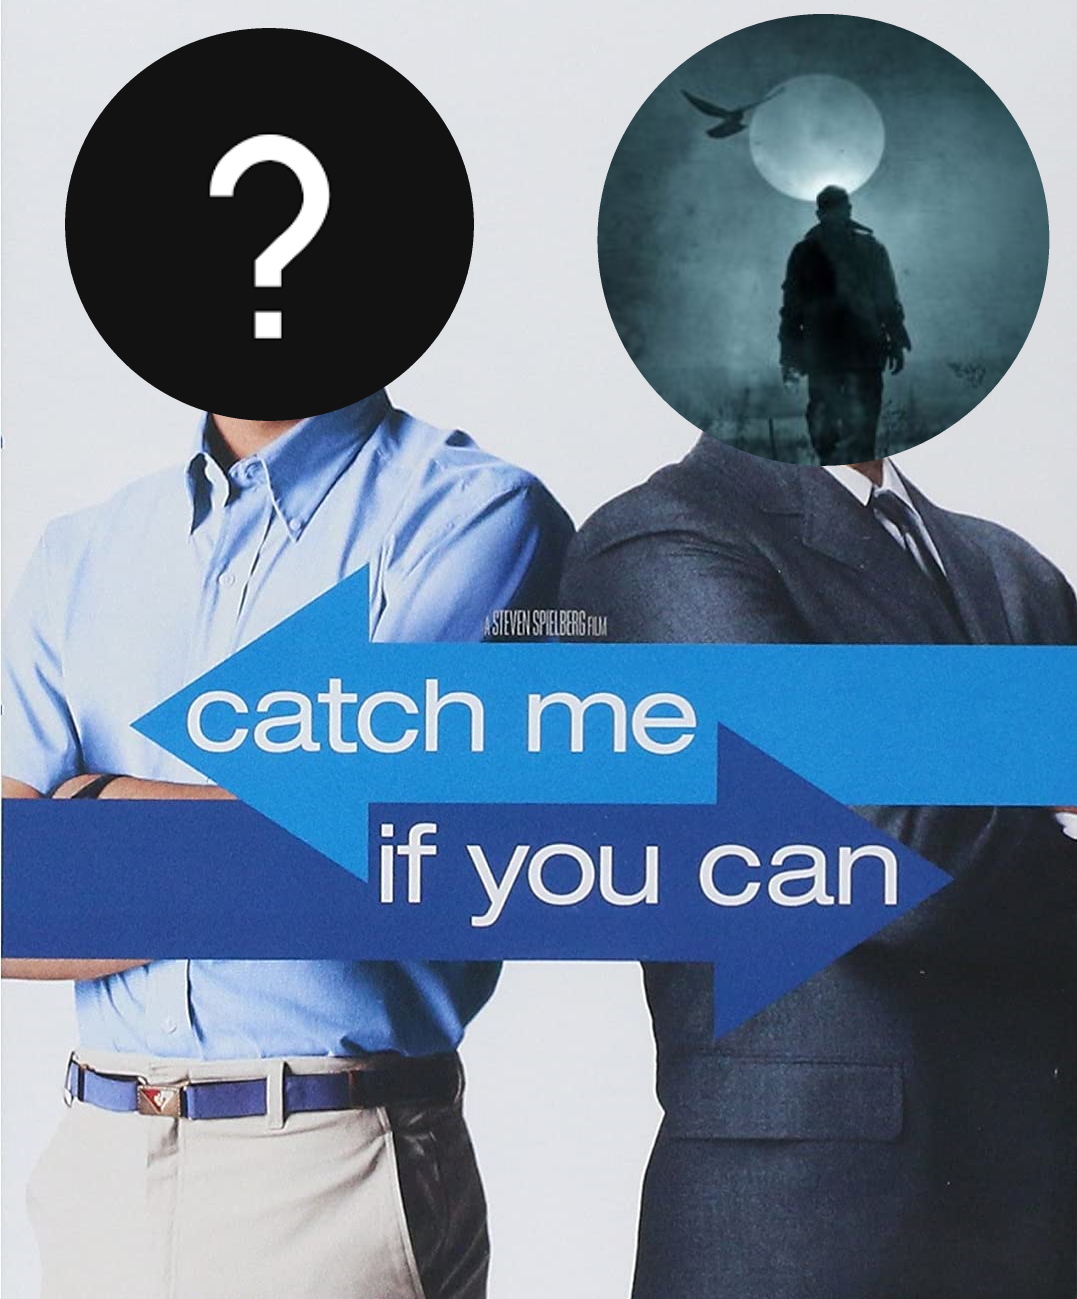 Catch me if you can.jpg